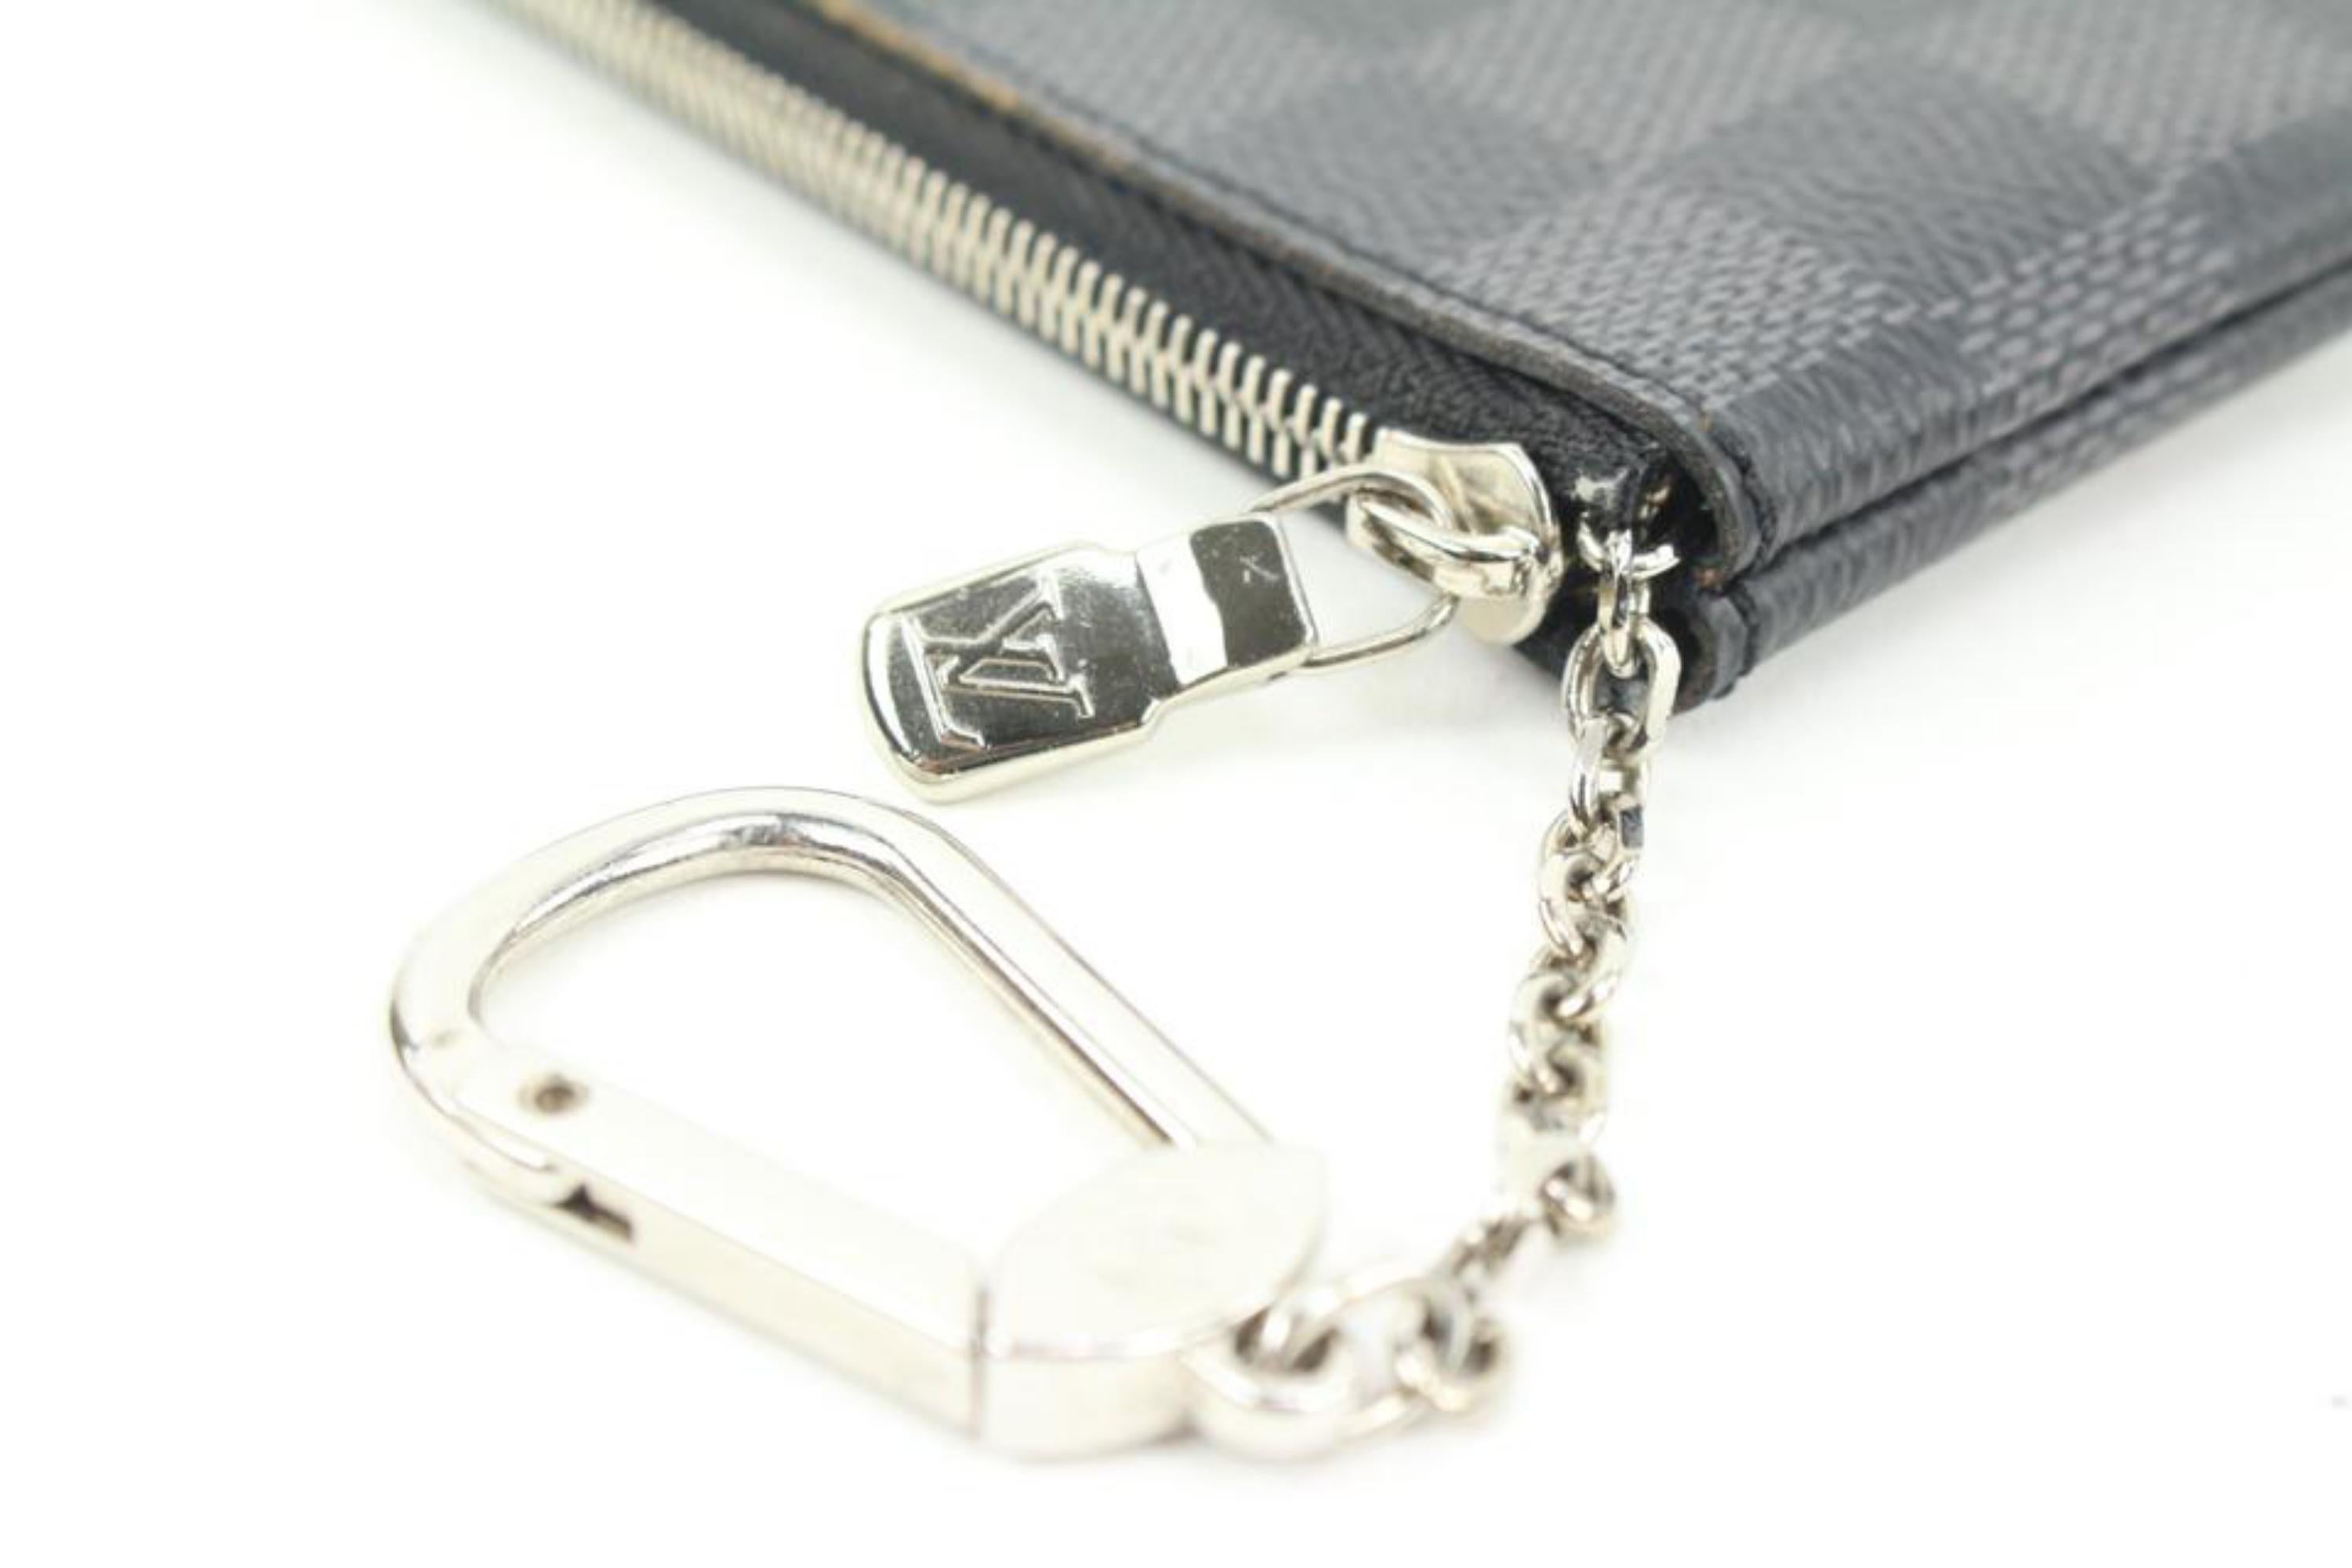 Louis Vuitton Black x Grey Damier Graphite Key Pouch Pochette Cles s126lv60 In Excellent Condition For Sale In Dix hills, NY